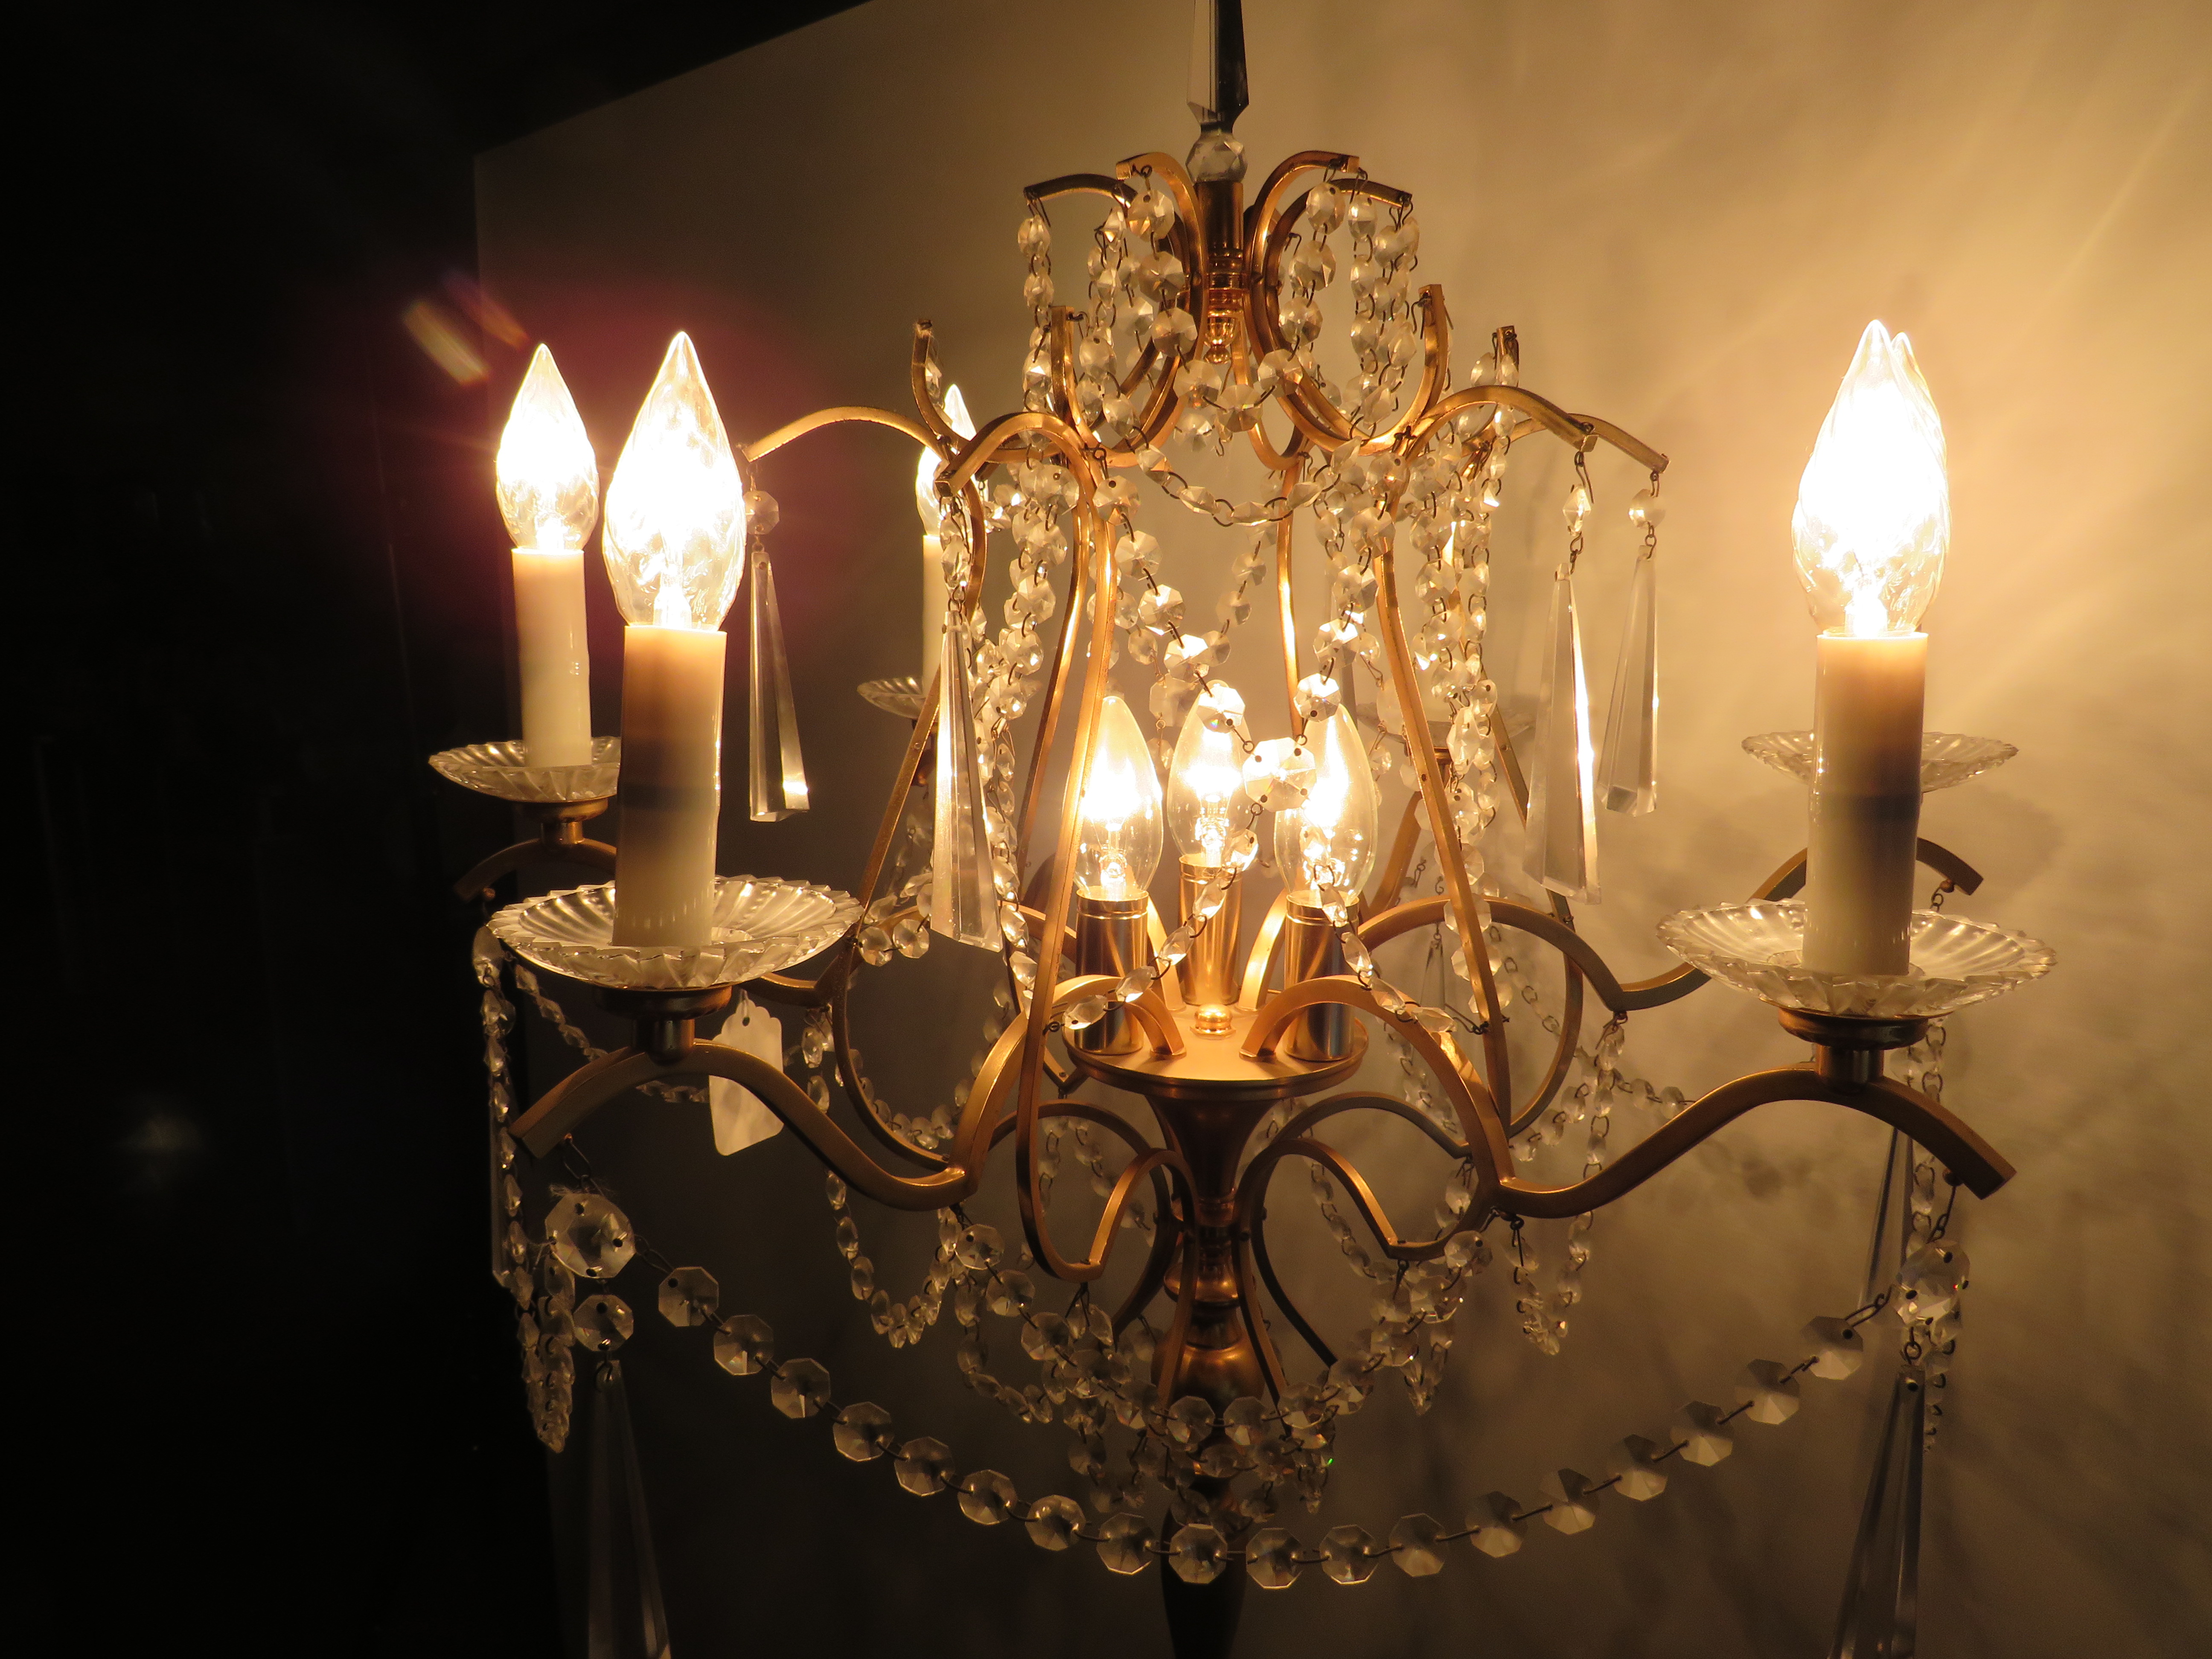 Brushed metal brass effect Standard lamp with 9 Candle bulbs and hanging glass lustres. Approx 67 in